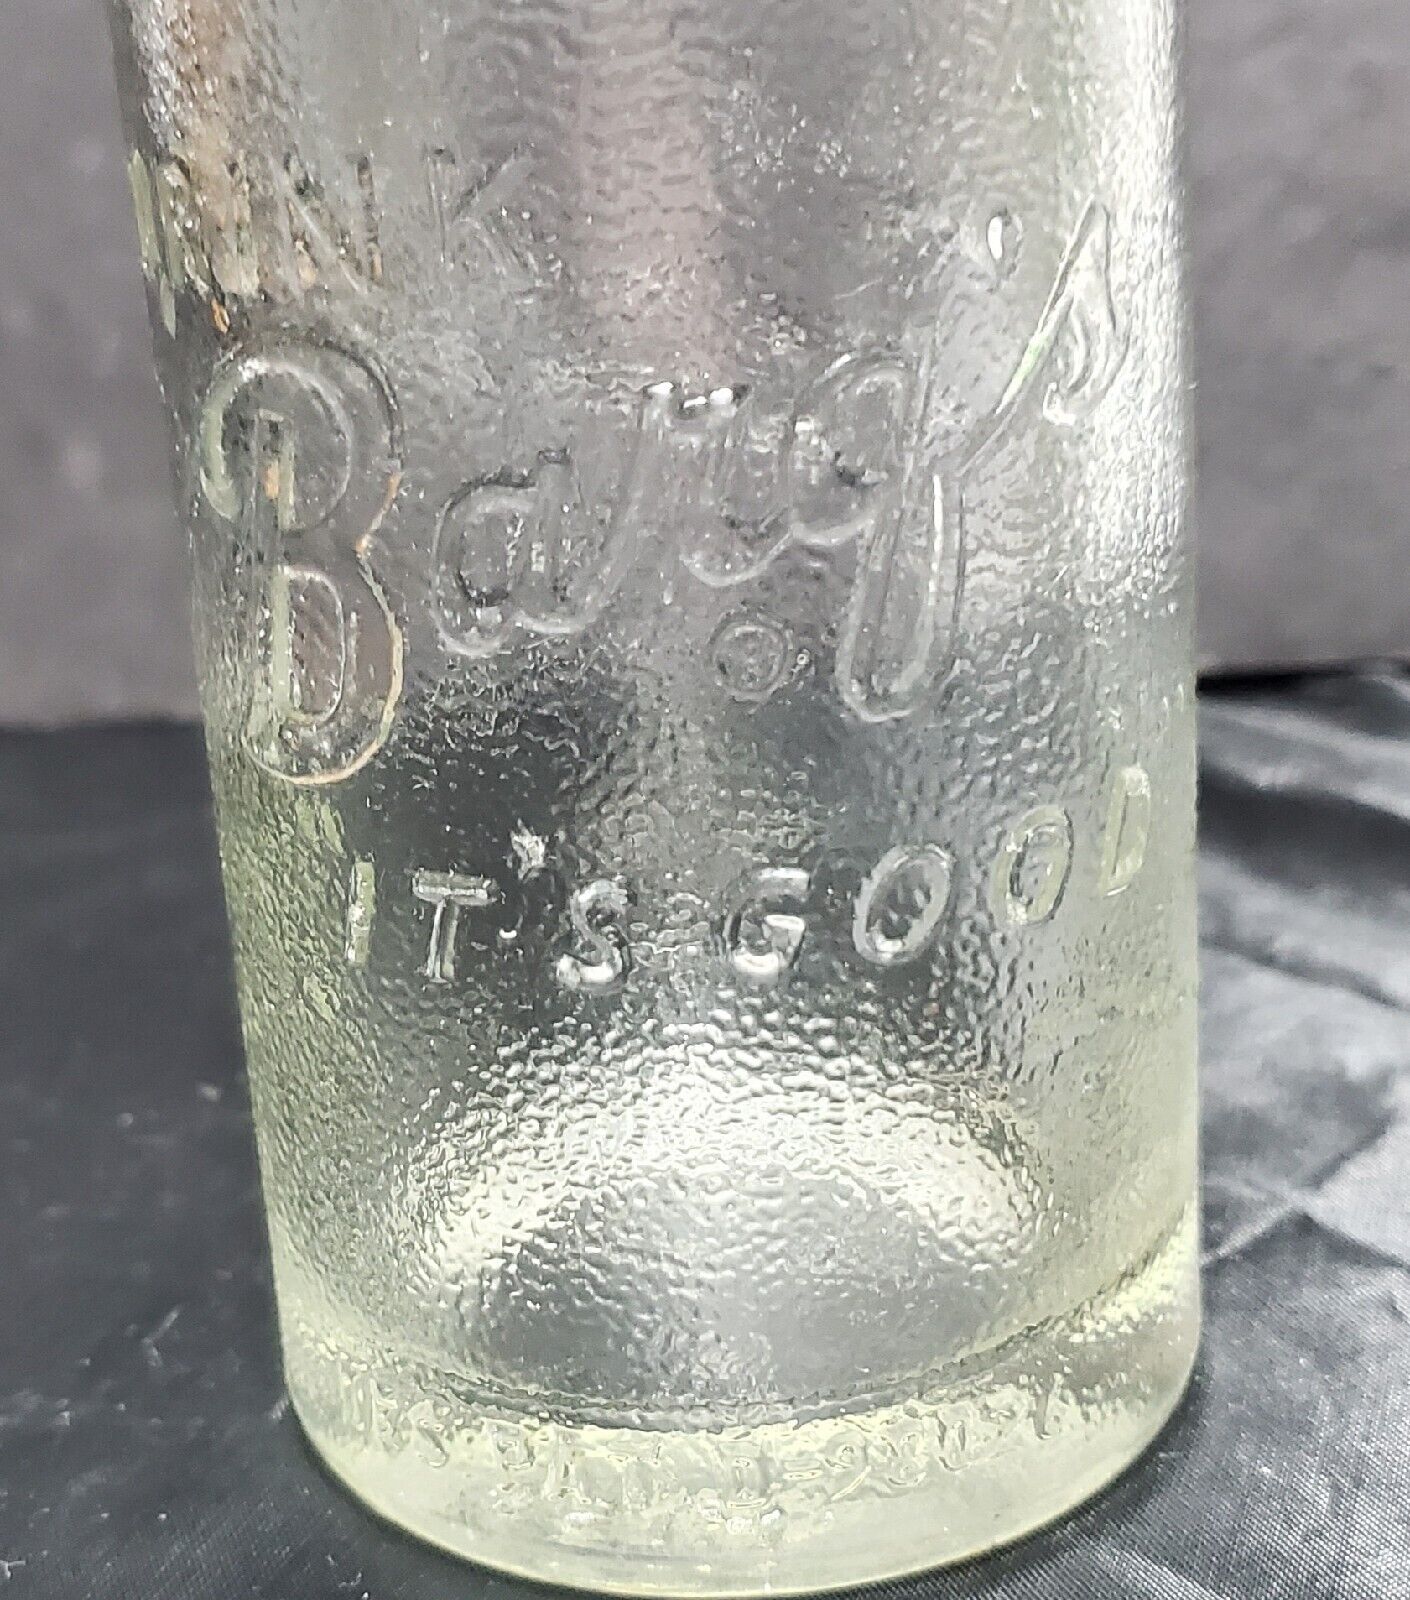 Vintage Barq’s Rootbeer Bottle Clear Embossed “Drink Barq’s It’s Good”